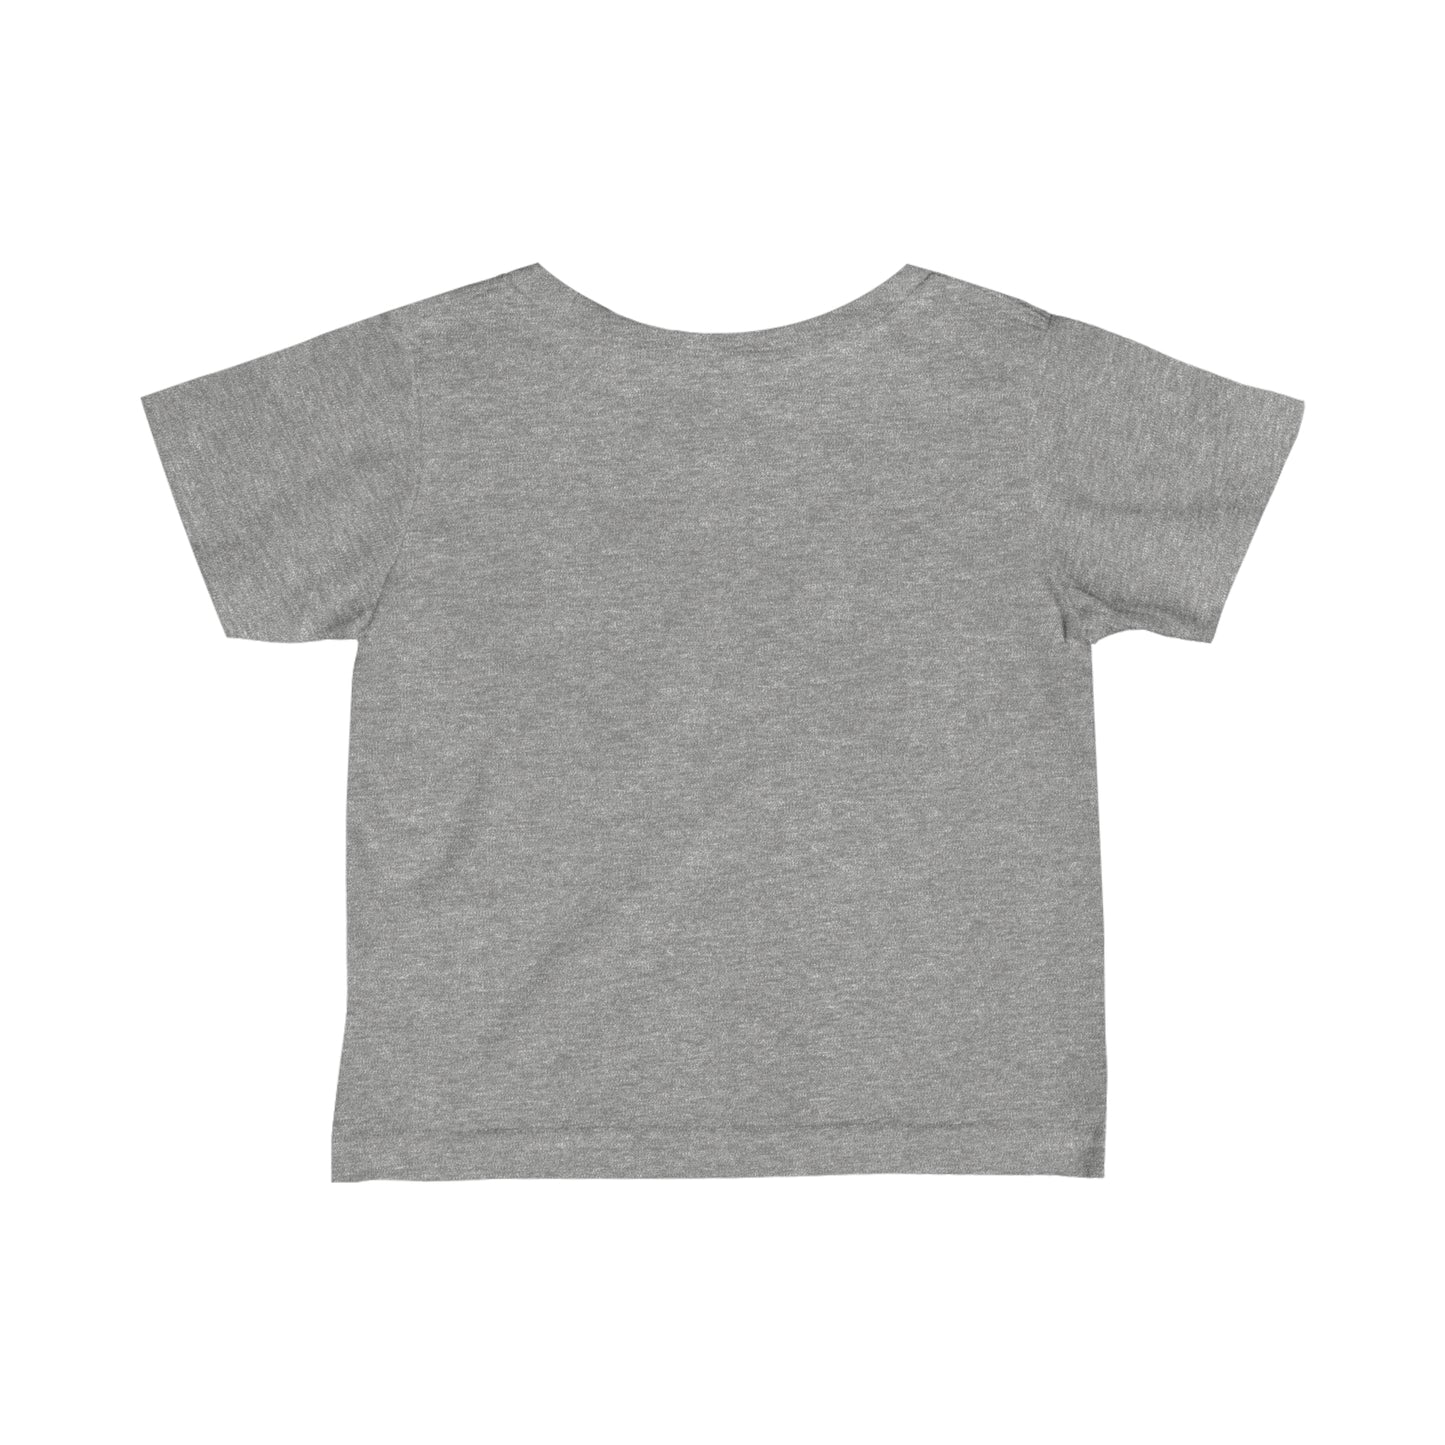 The Sky's Not The Limit. It's Just The Beginning. Infant Fine Jersey Tee